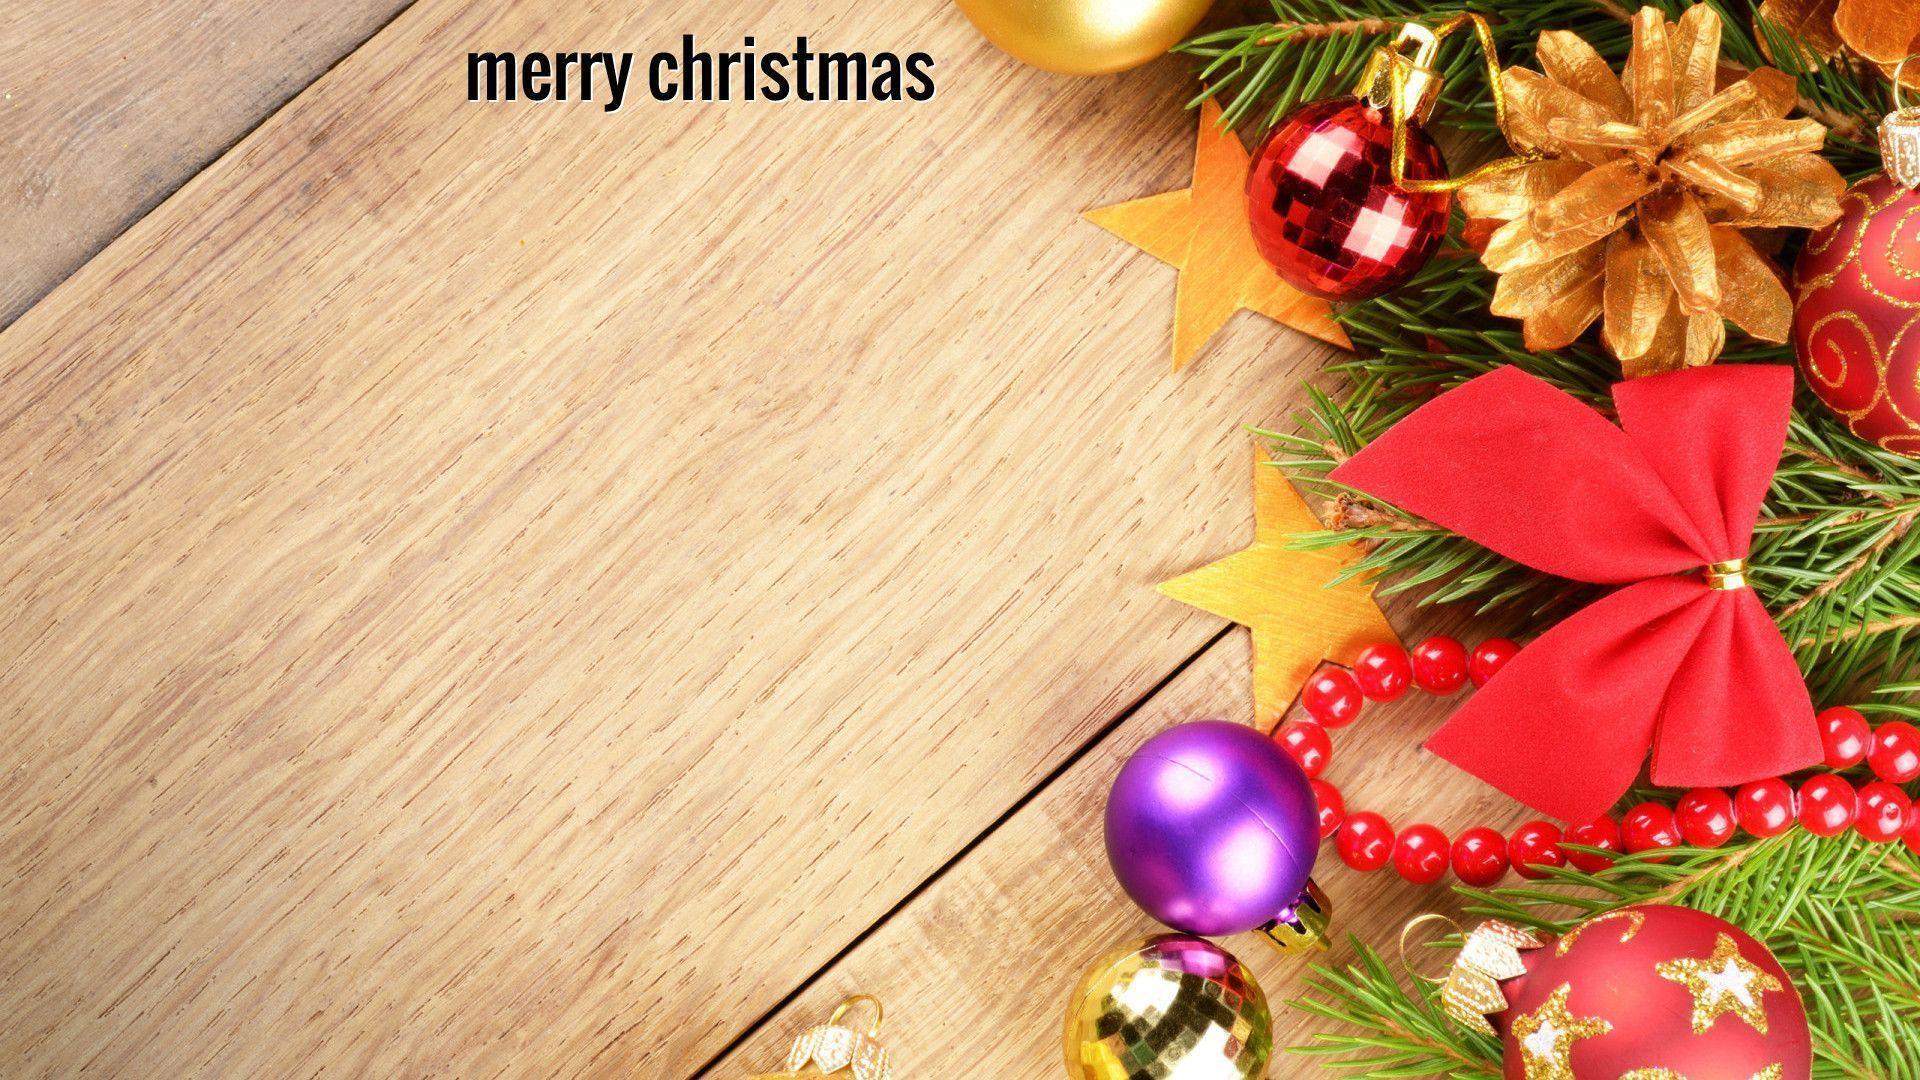 Cute Merry Christmas Wallpaper to Download For Free